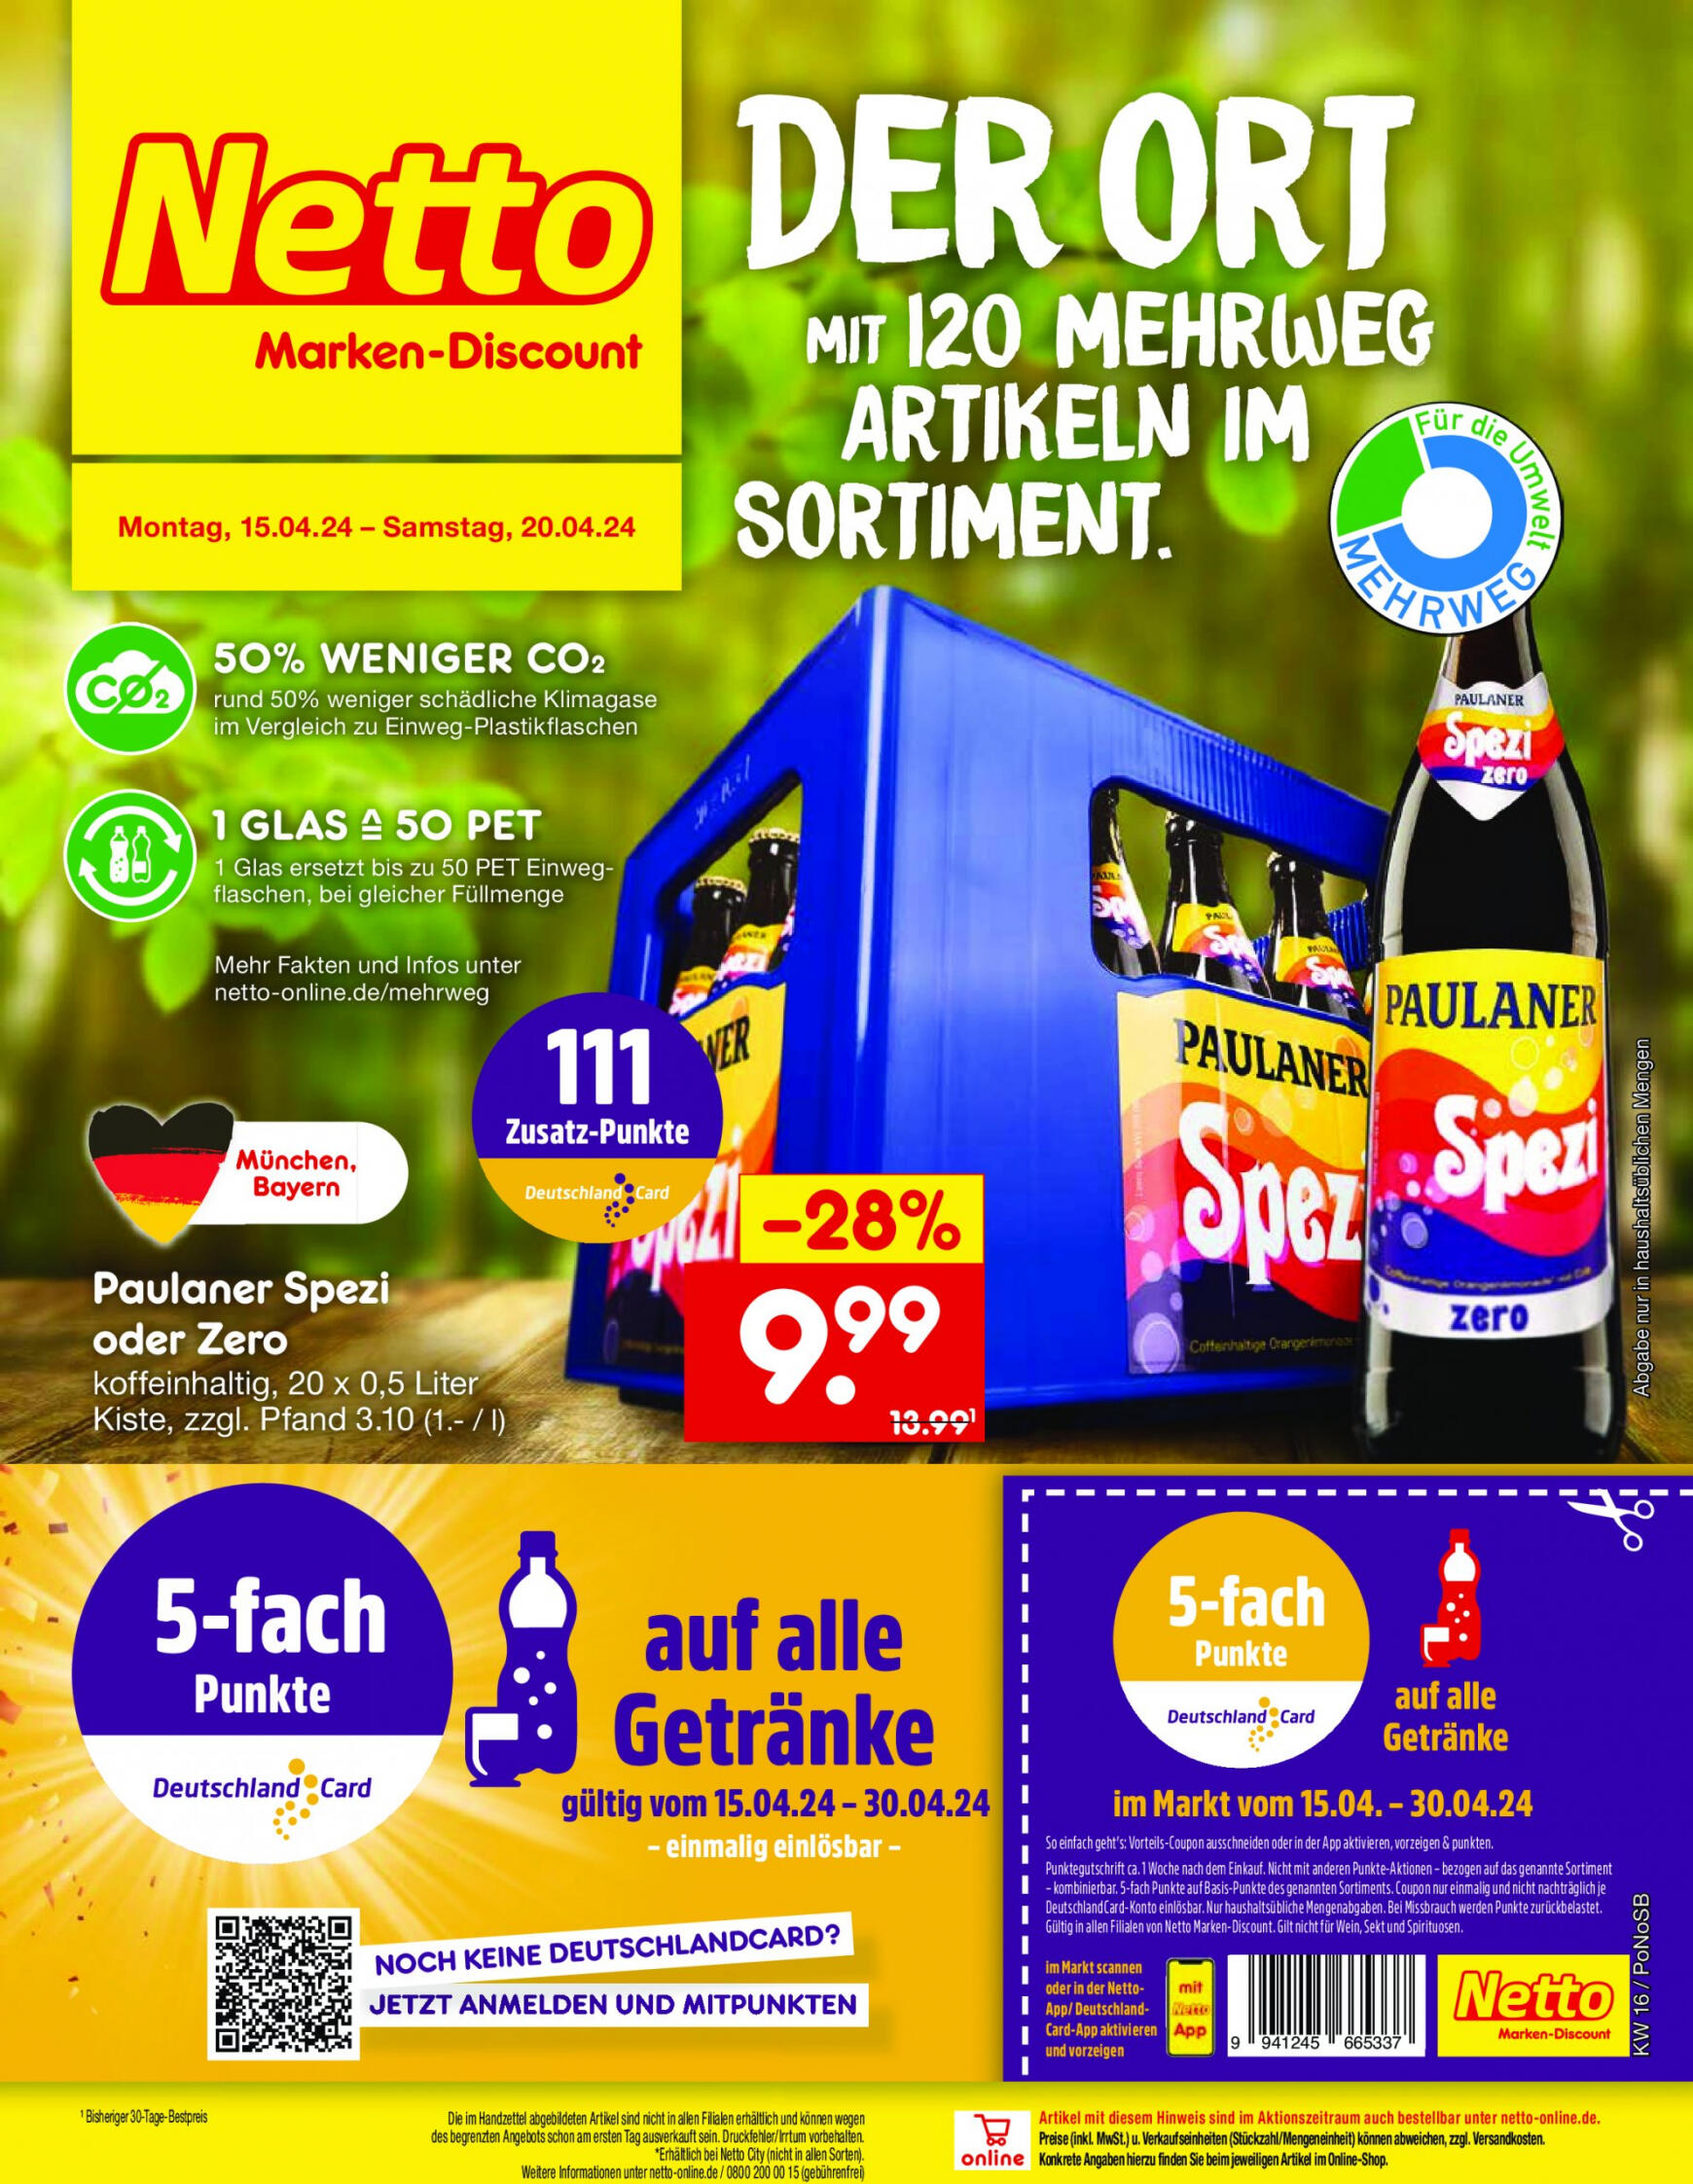 netto - Flyer Netto aktuell 15.04. - 20.04. - page: 20